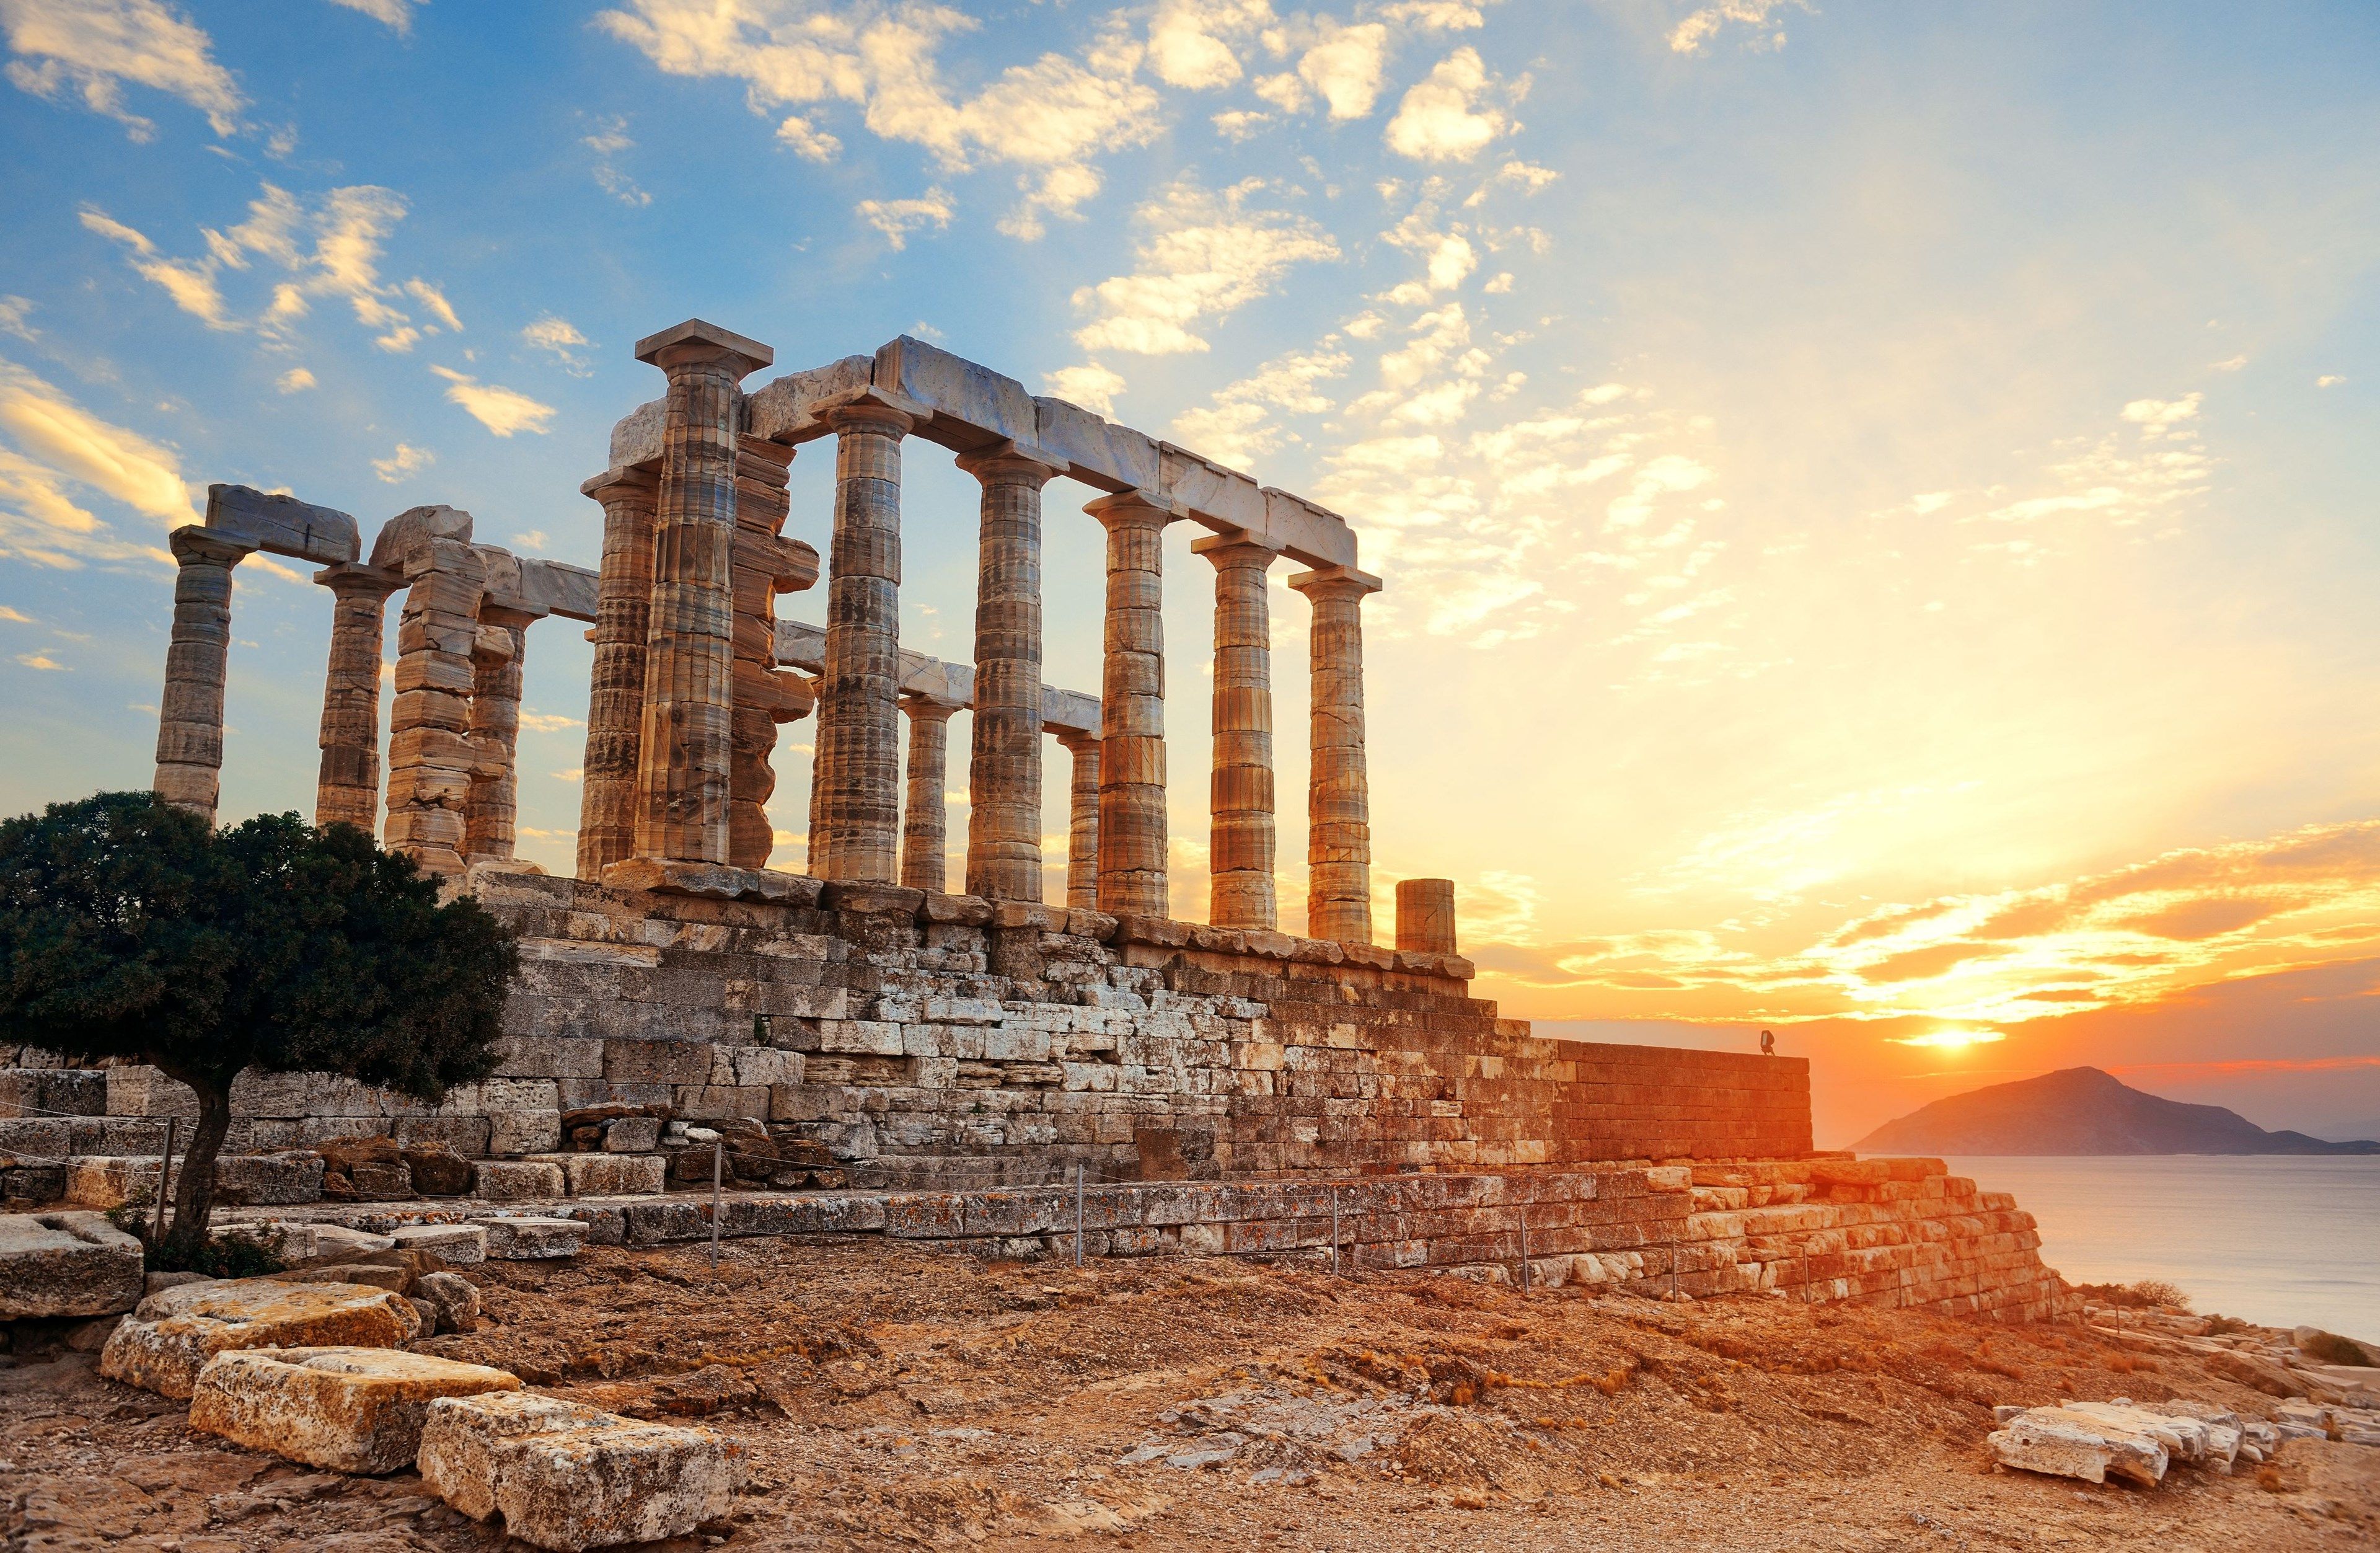 NEW CRUISE: ANTIQUITY OF THE AEGEAN